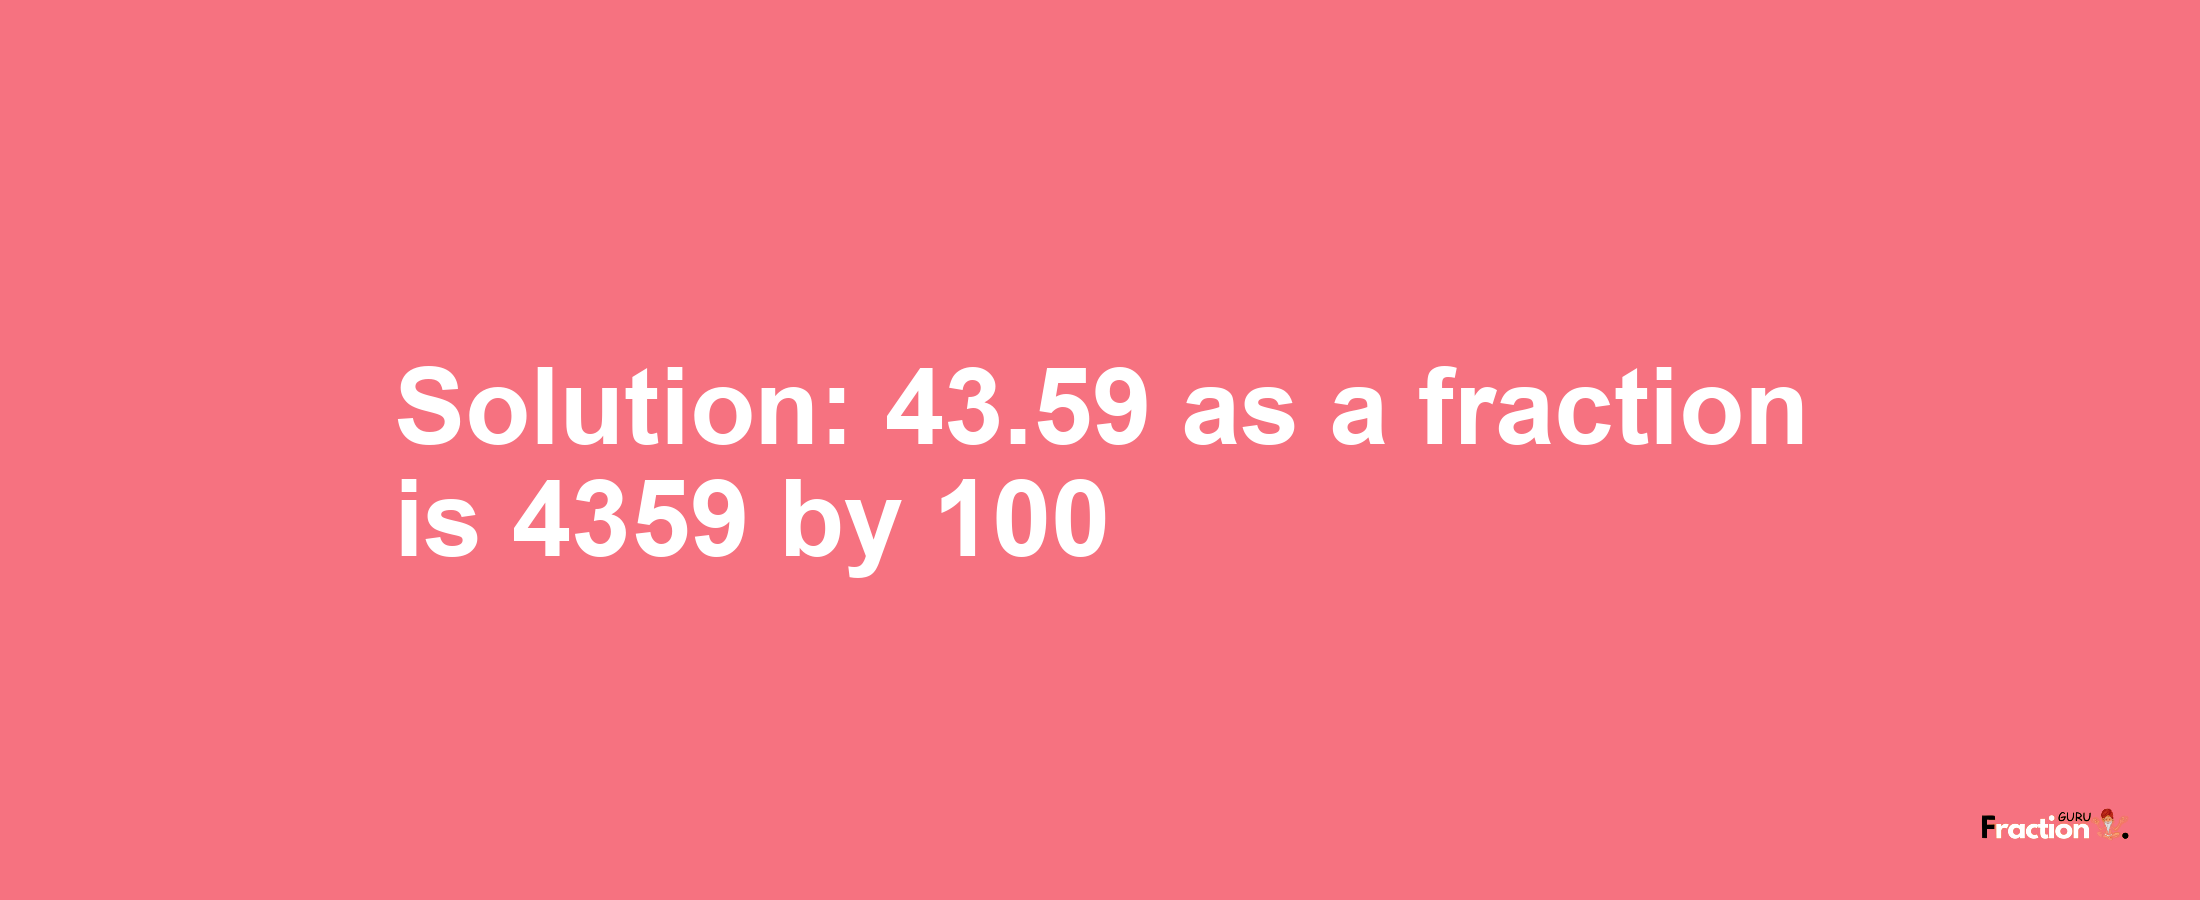 Solution:43.59 as a fraction is 4359/100